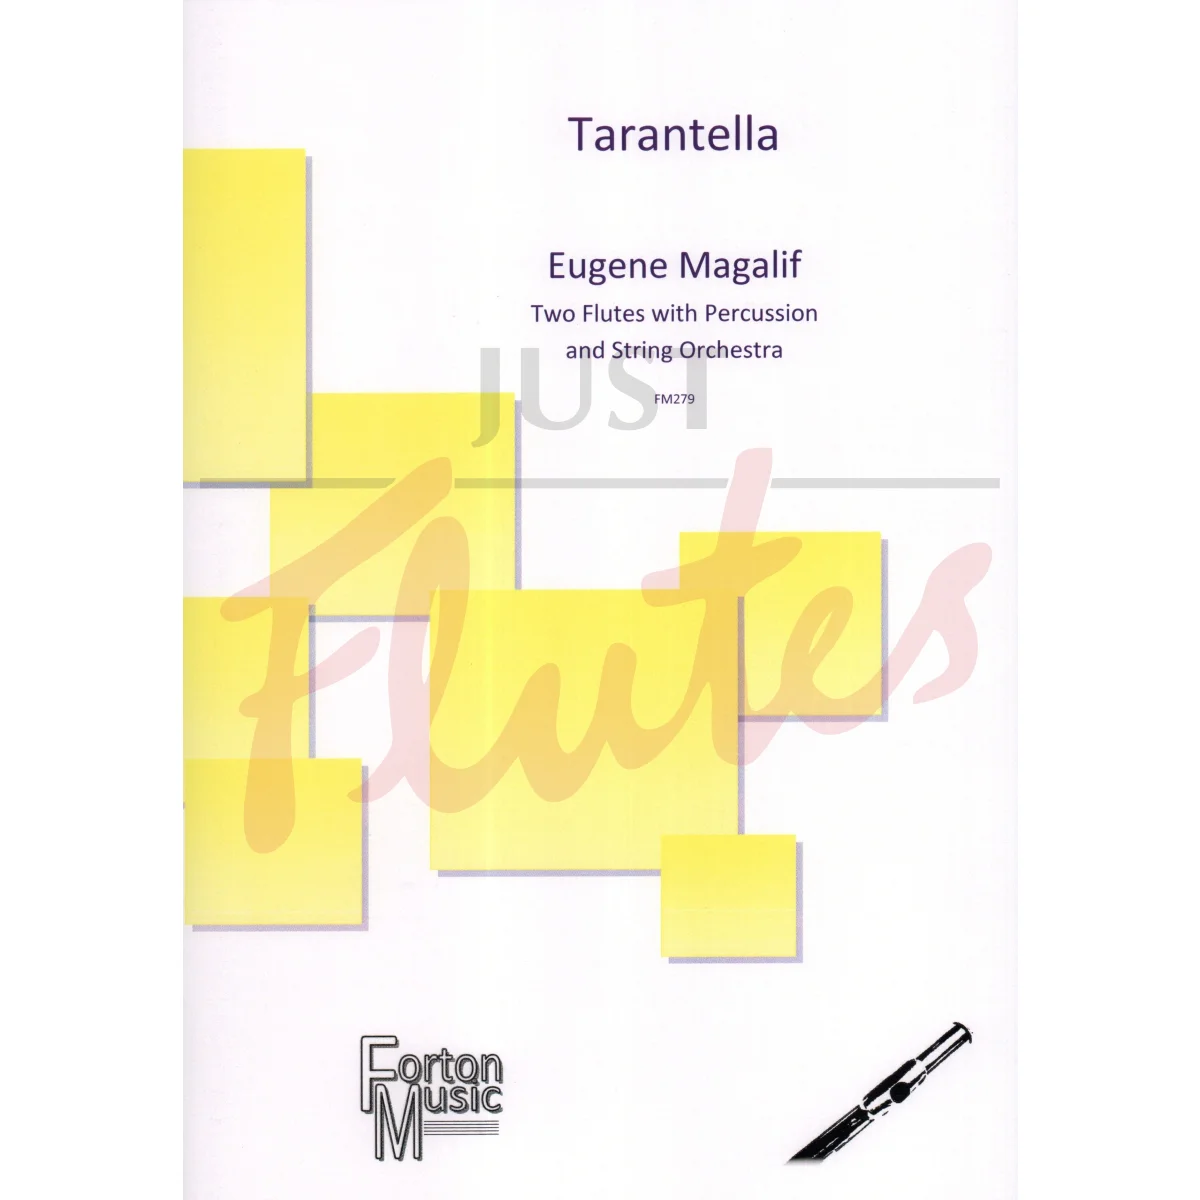 Tarantella for Two Flutes, Percussion and Strings